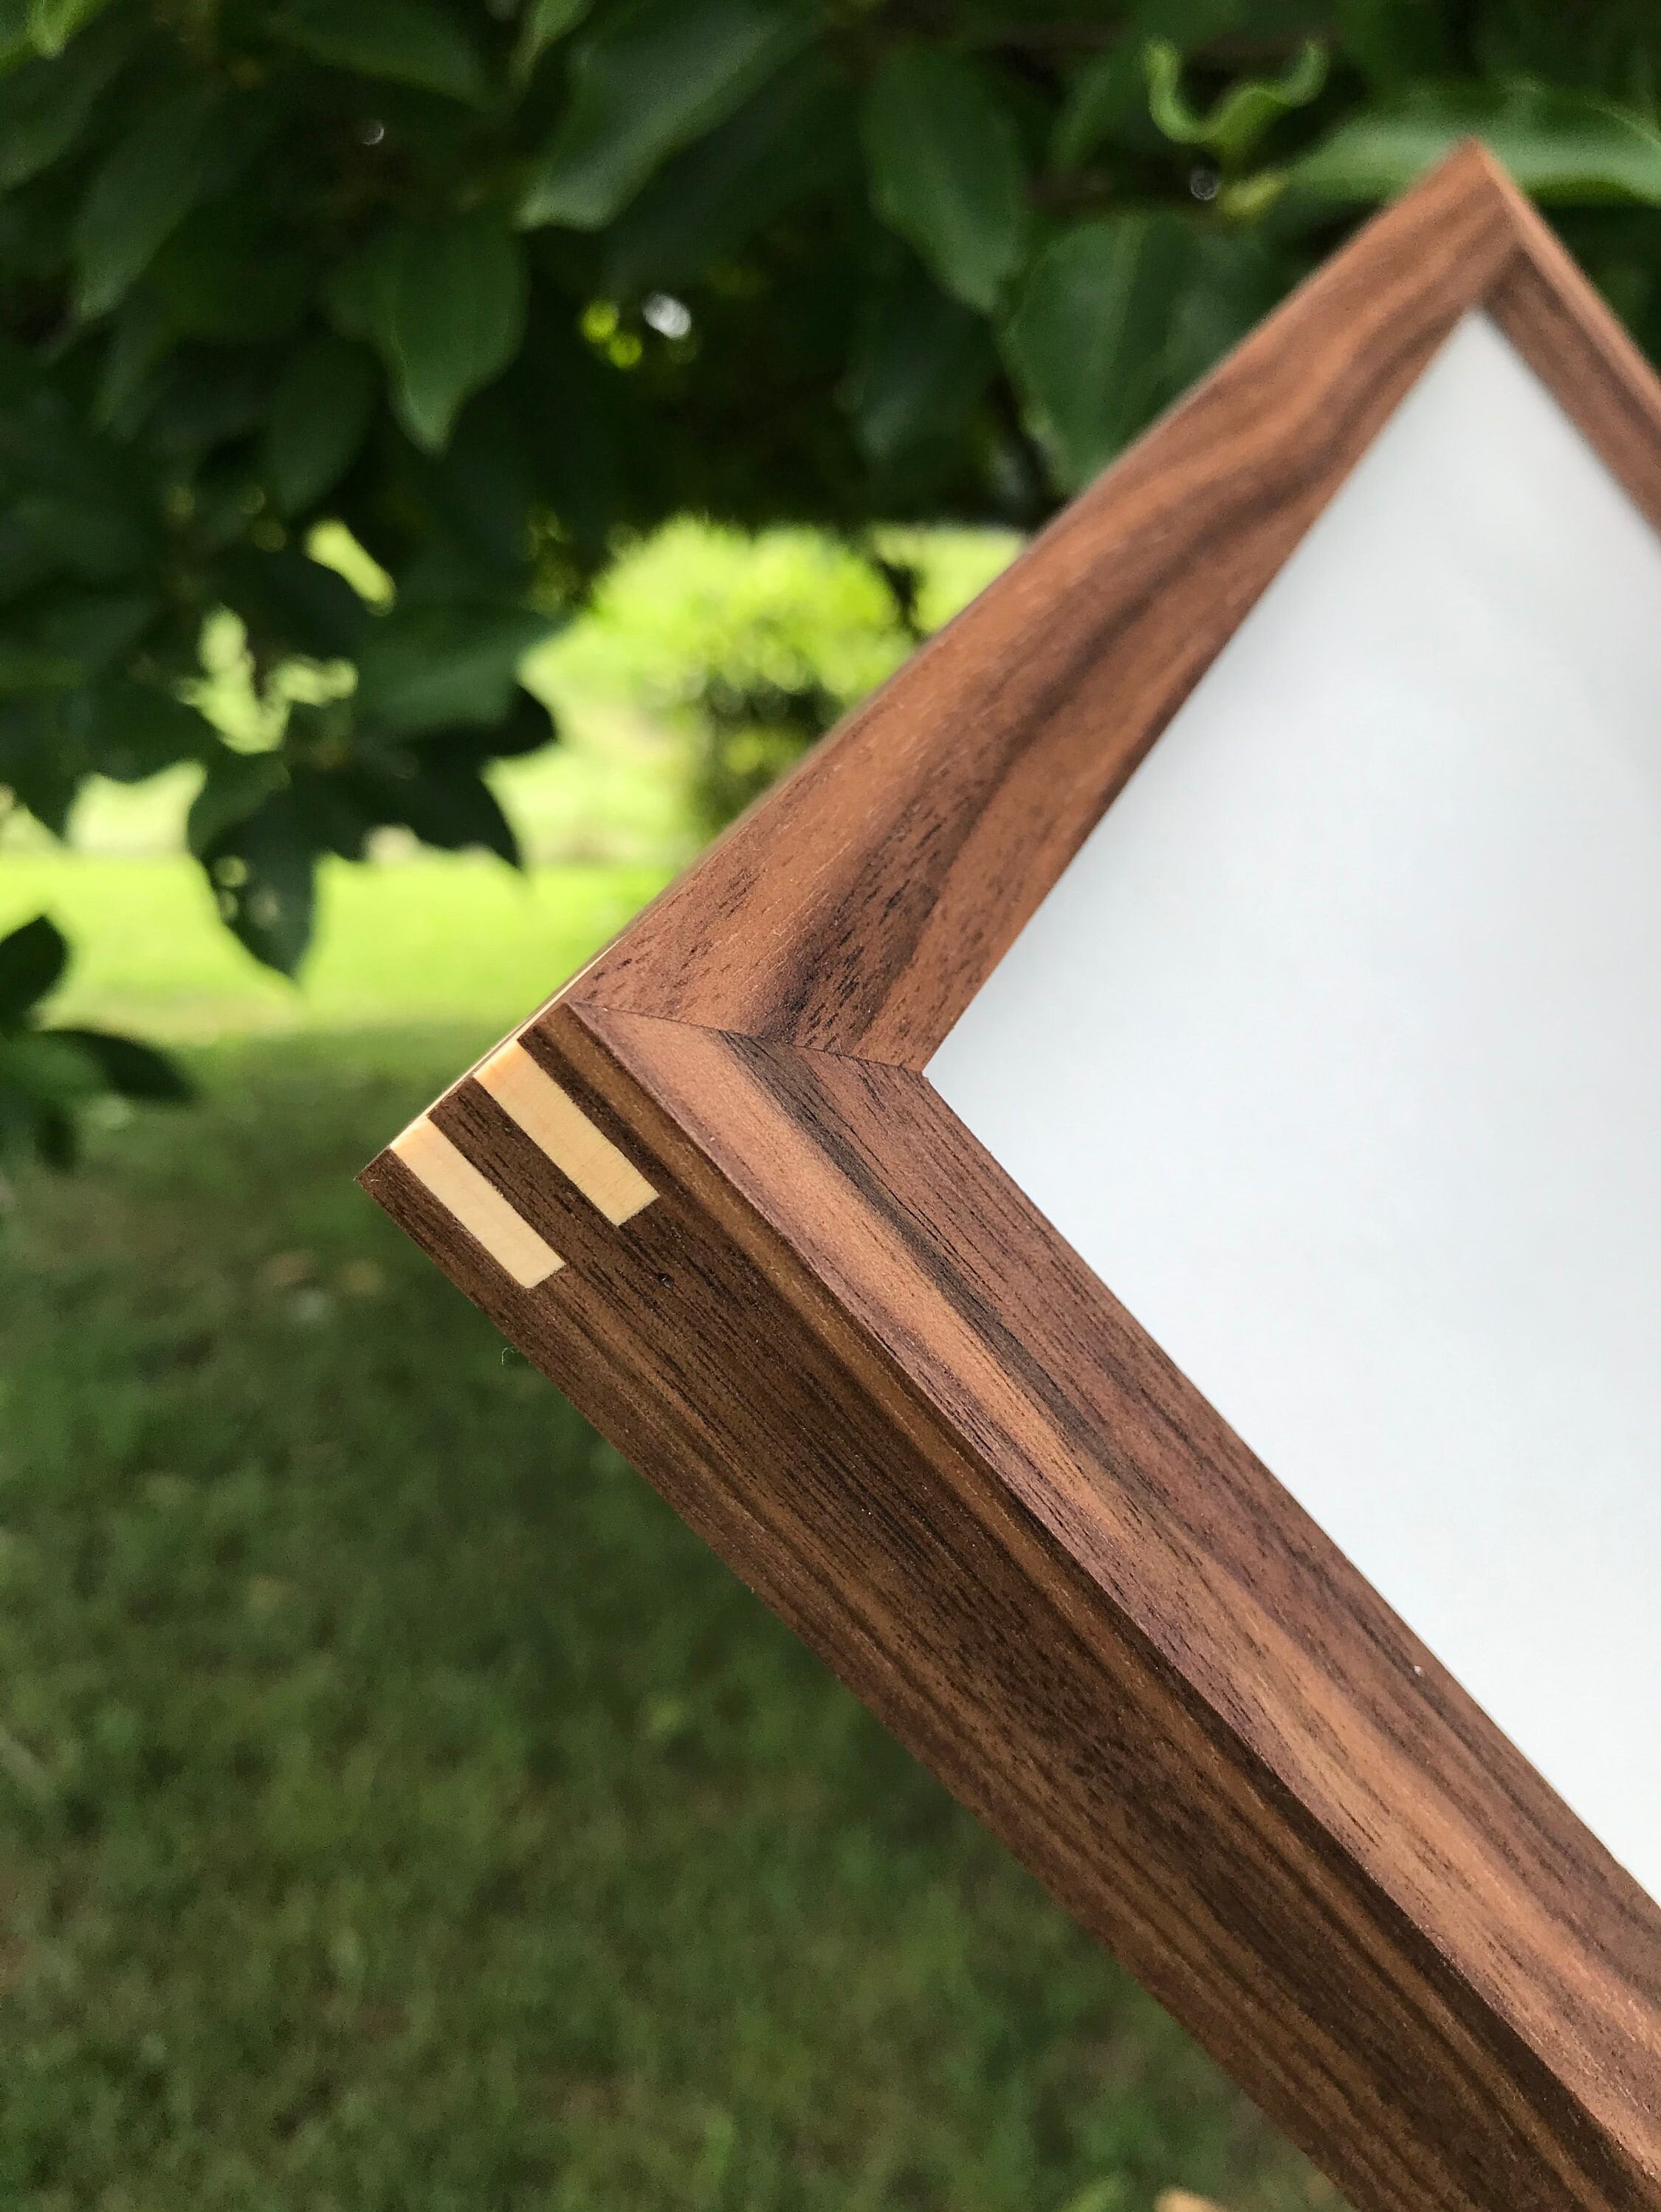 artisane, 16x20”, Picture Frame, Gallery Frame, Solid White Oak